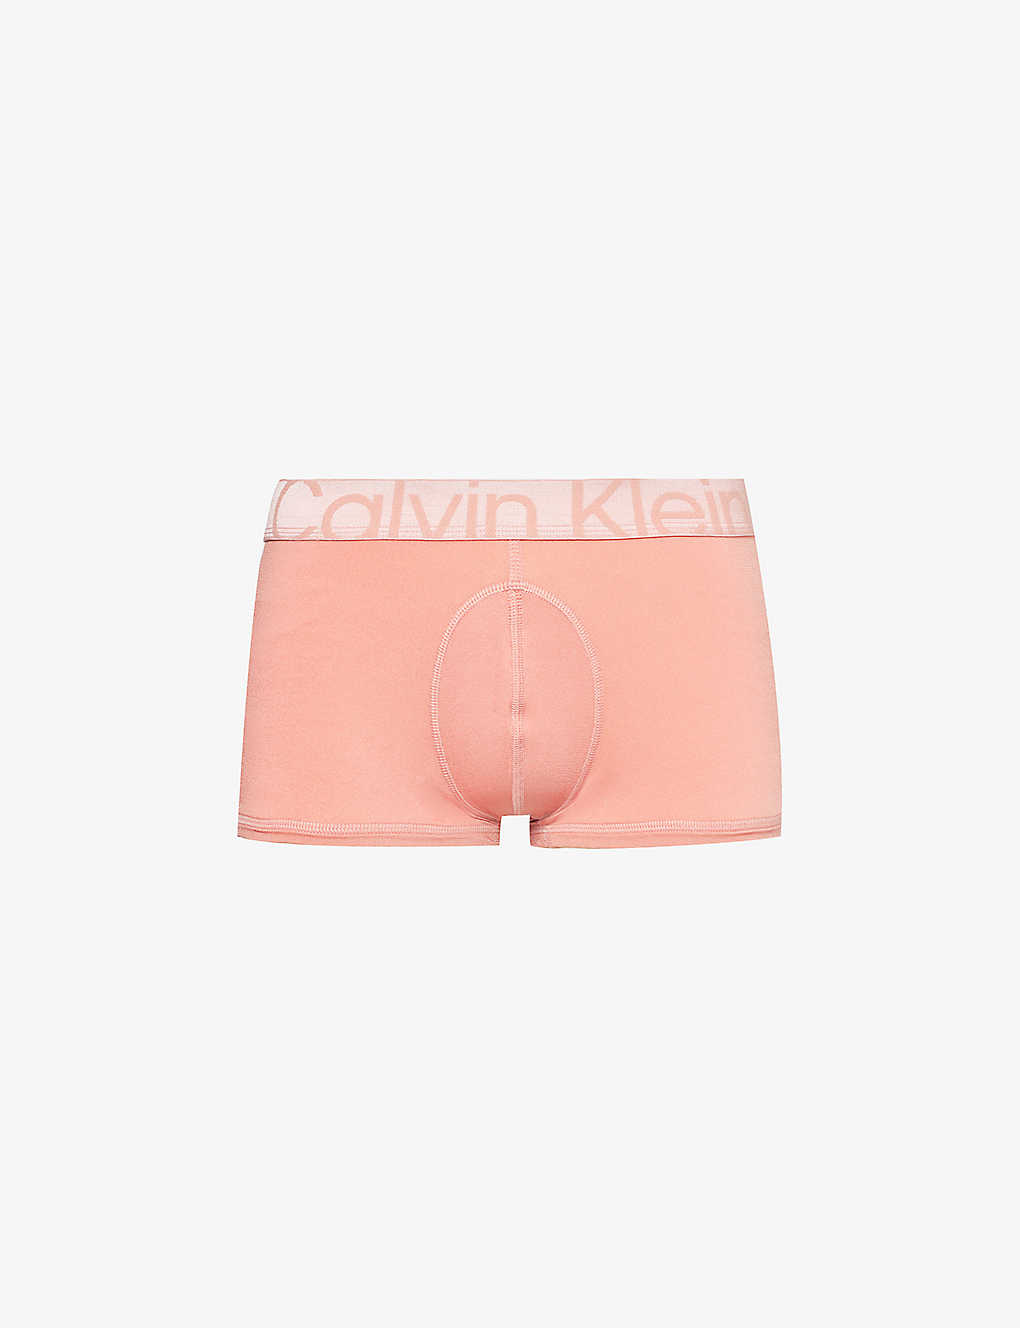 Calvin Klein Mens Mecca Orange Branded-waistband Low-rise Stretch-jersey Trunks